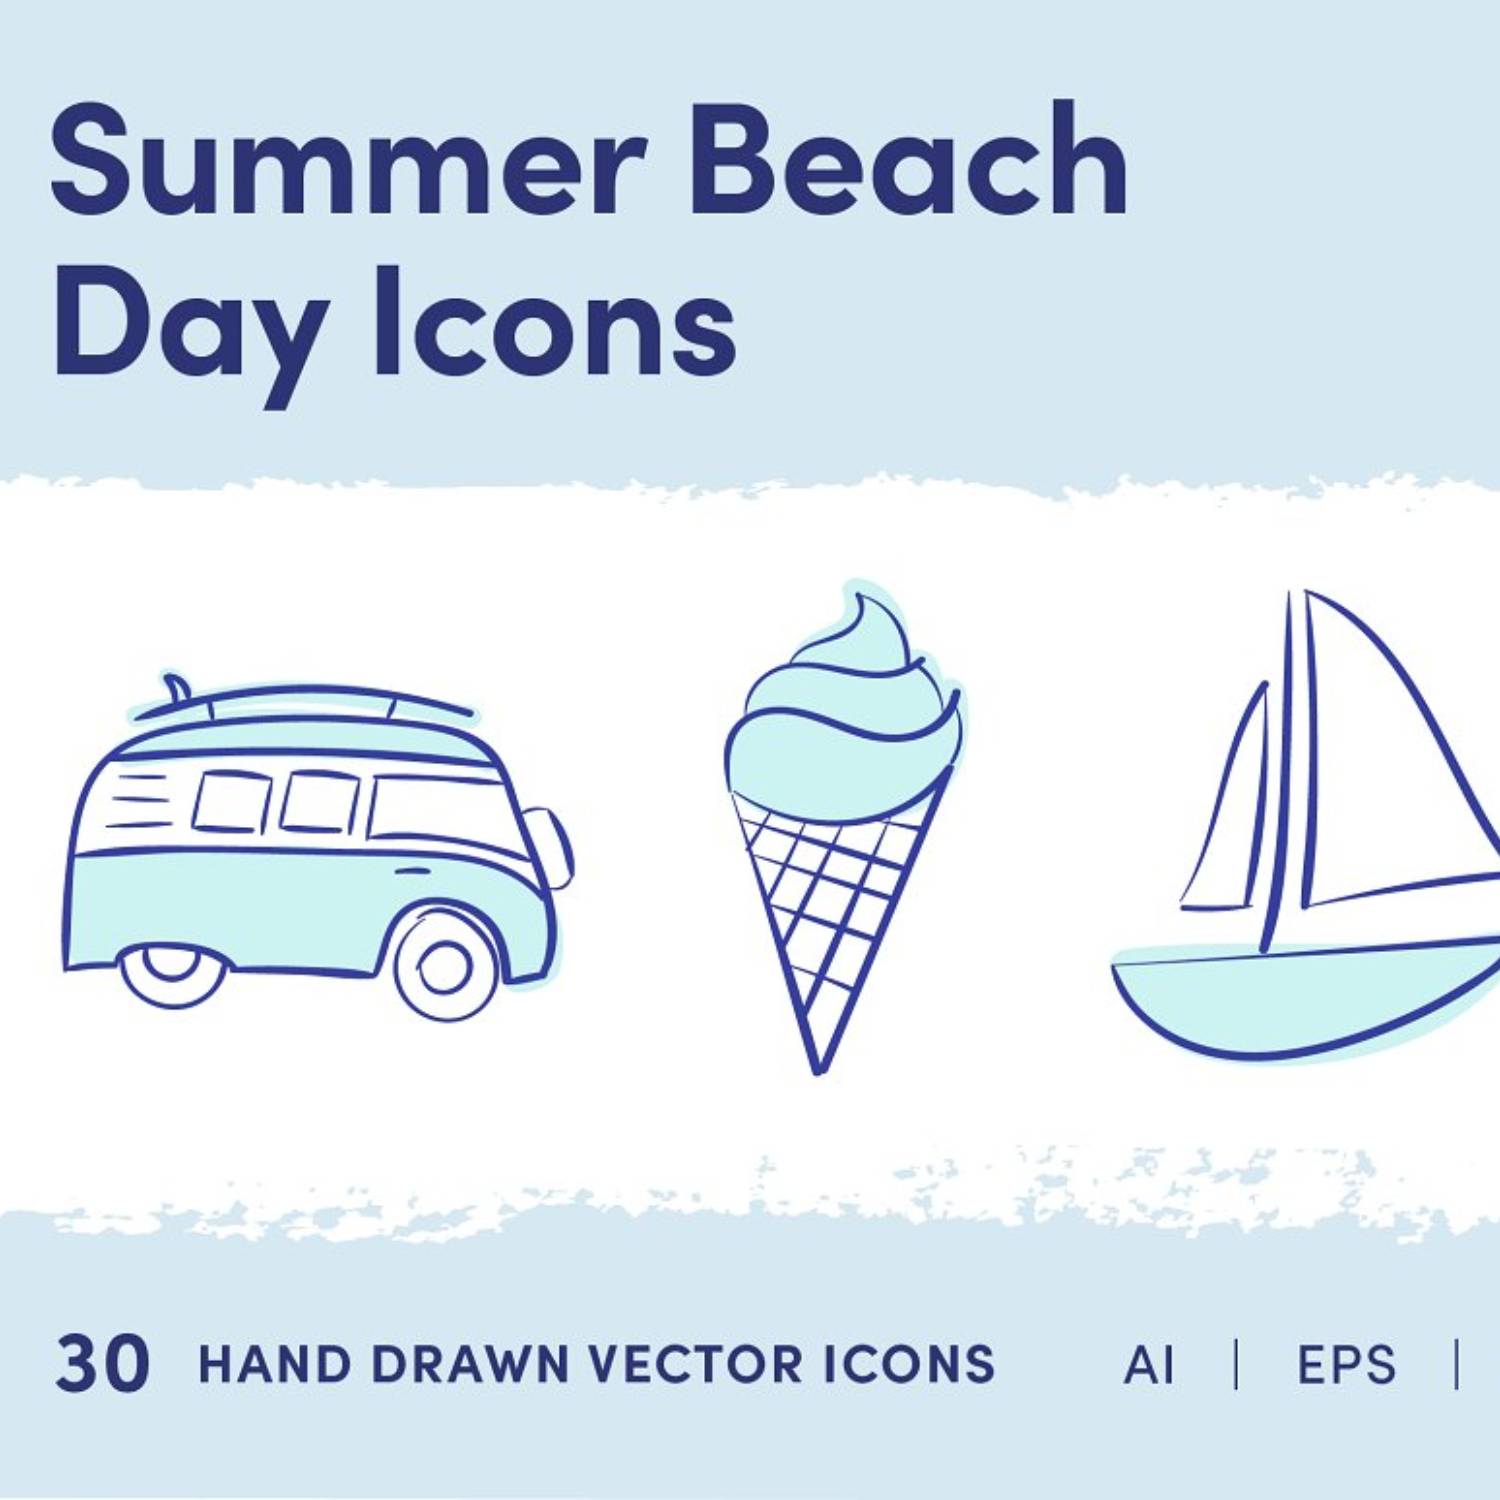 Summer Beach Day Icons Main Cover.